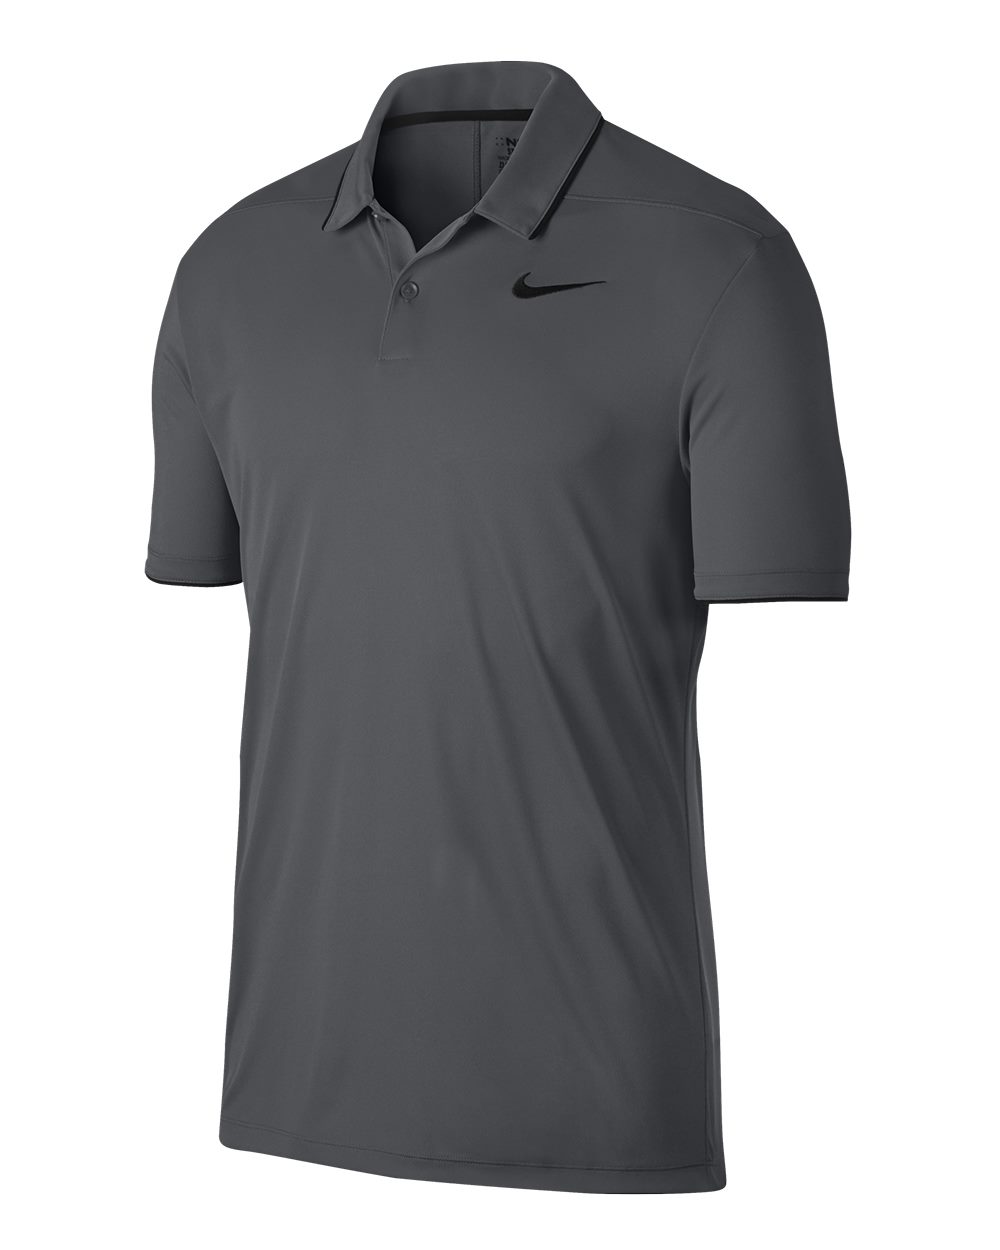 Nike Dri-FIT Sport Shirt Essential Solid - 904476 - Wescan Embroidery ...